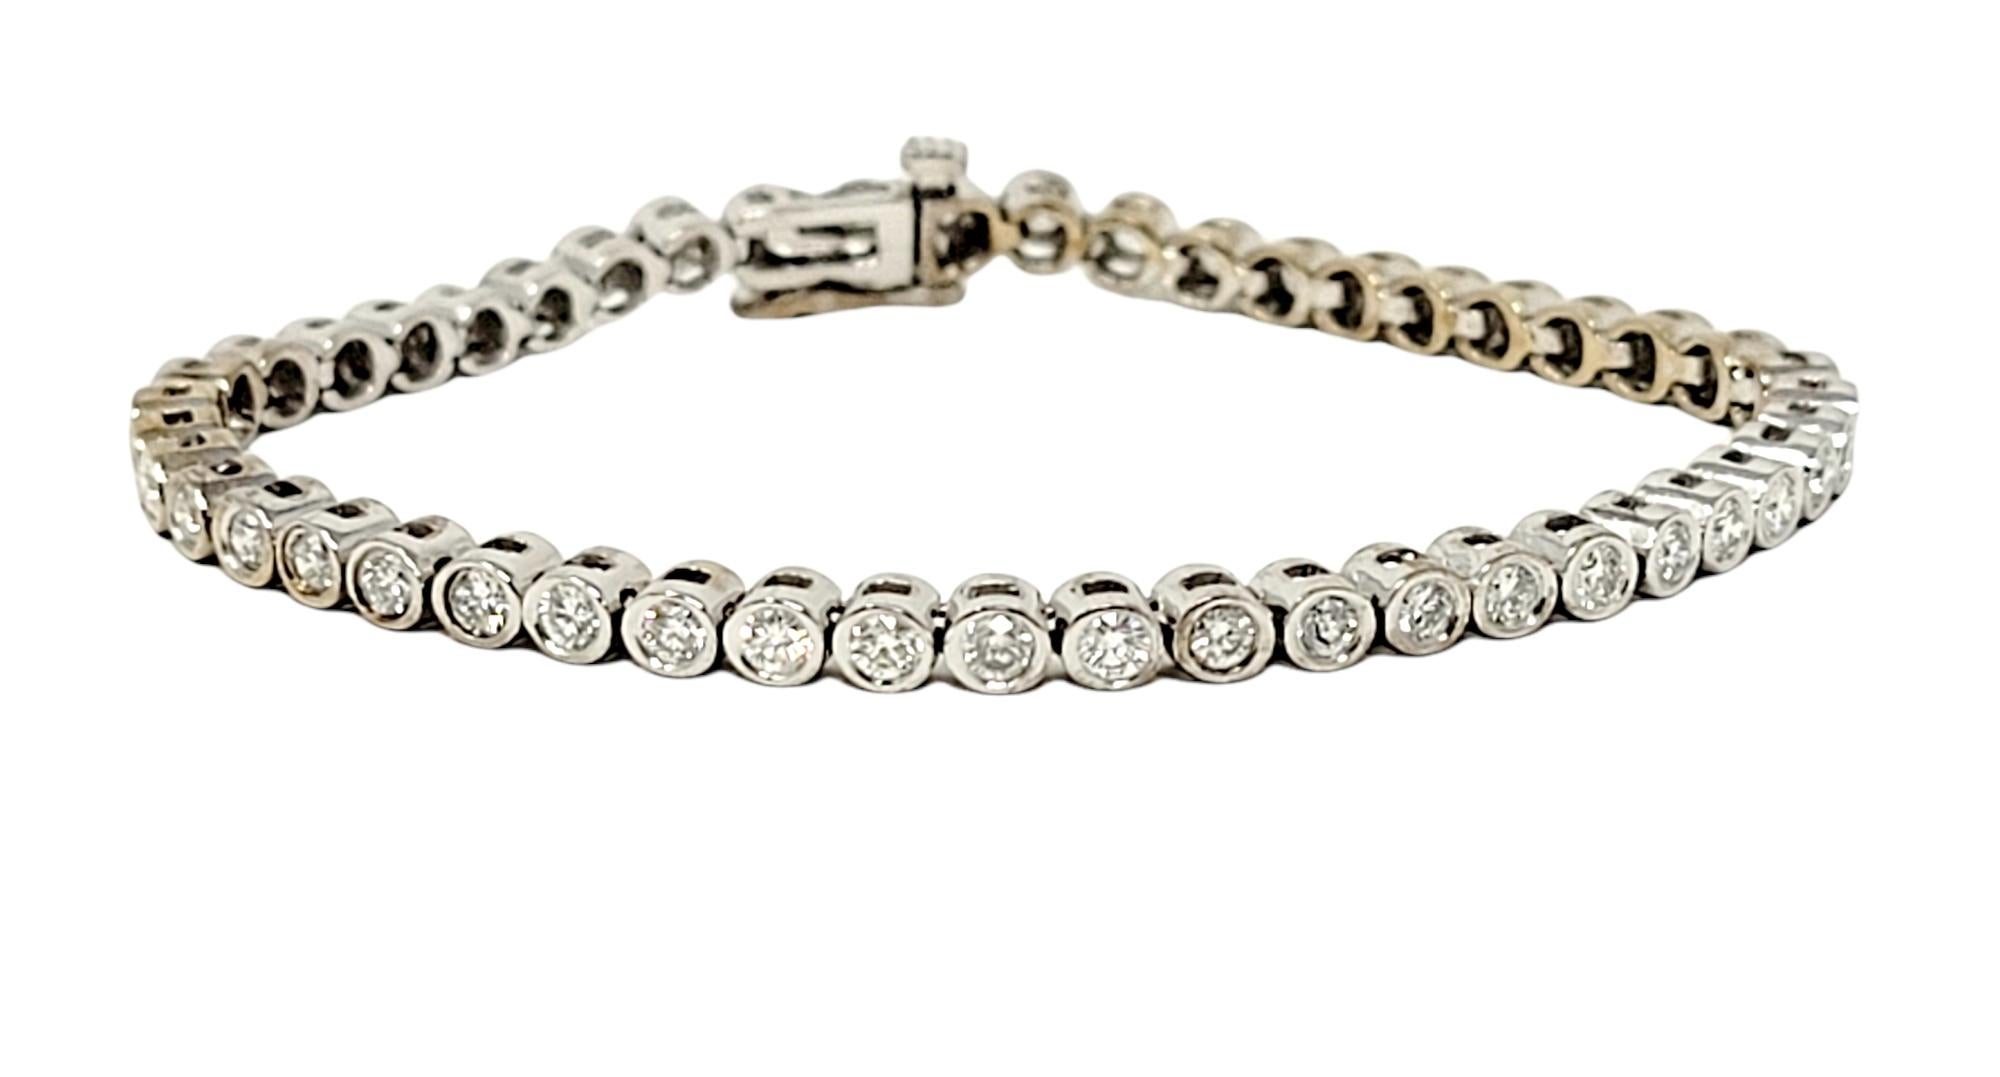 This is an absolutely gorgeous diamond tennis bracelet that will stand the test of time. The elegant white gold setting paired with the timeless round diamonds makes this piece a true classic that will never go out of style. 
Features 47 sparkling